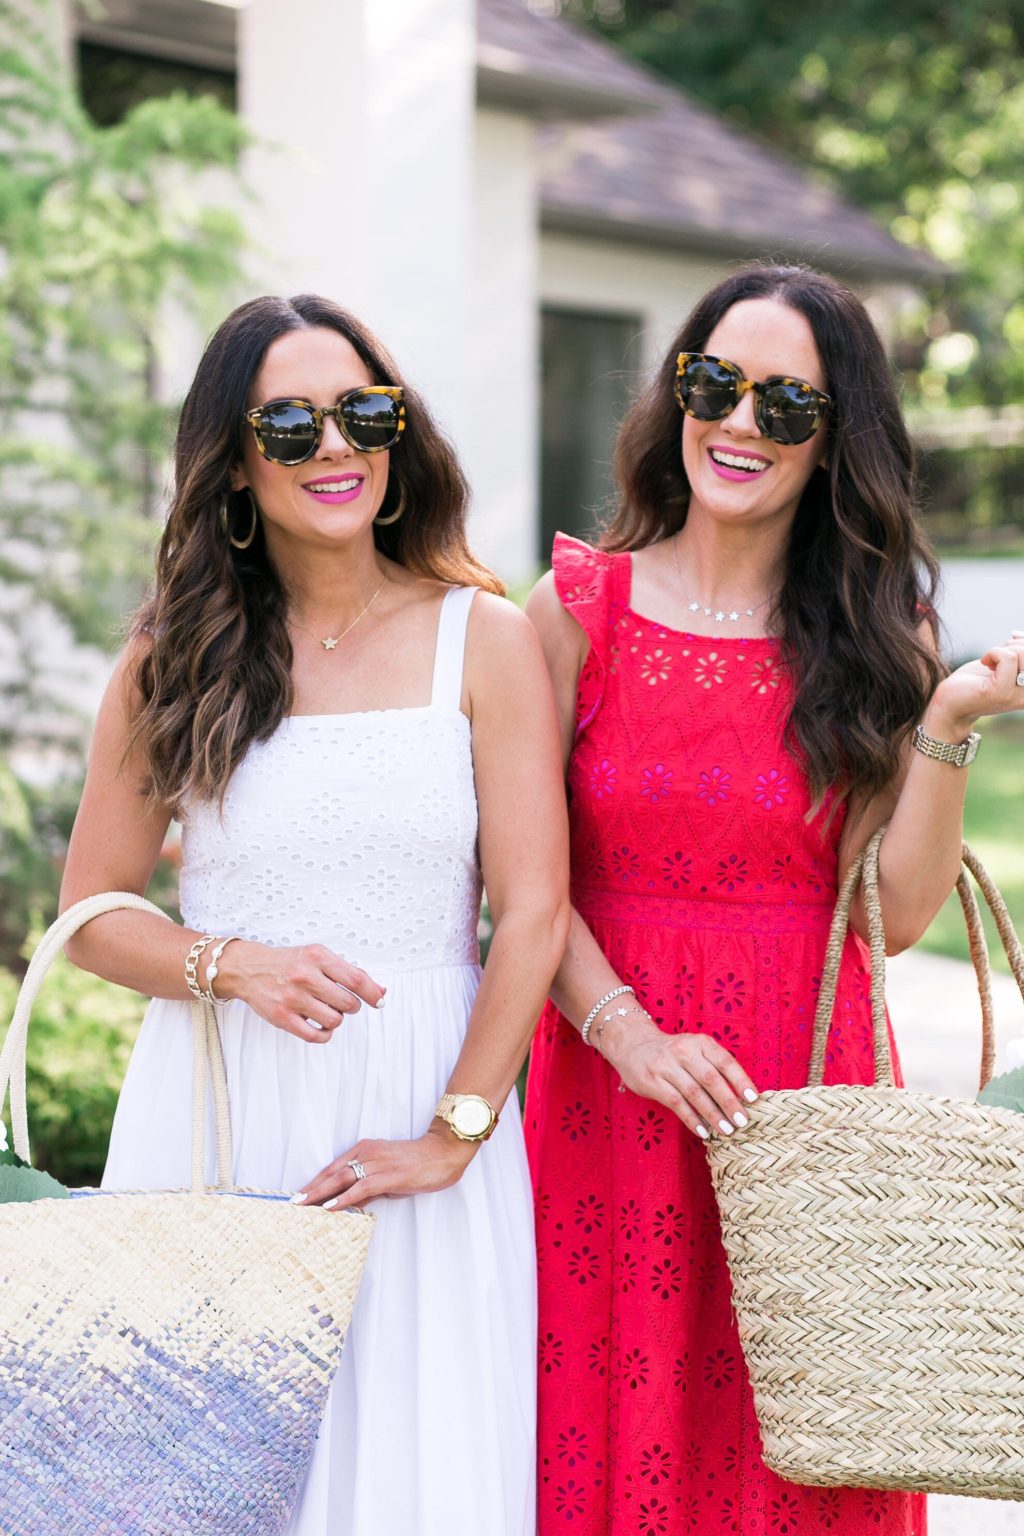 Our Favorite 4th Of July Sales 2021! - The Double Take Girls